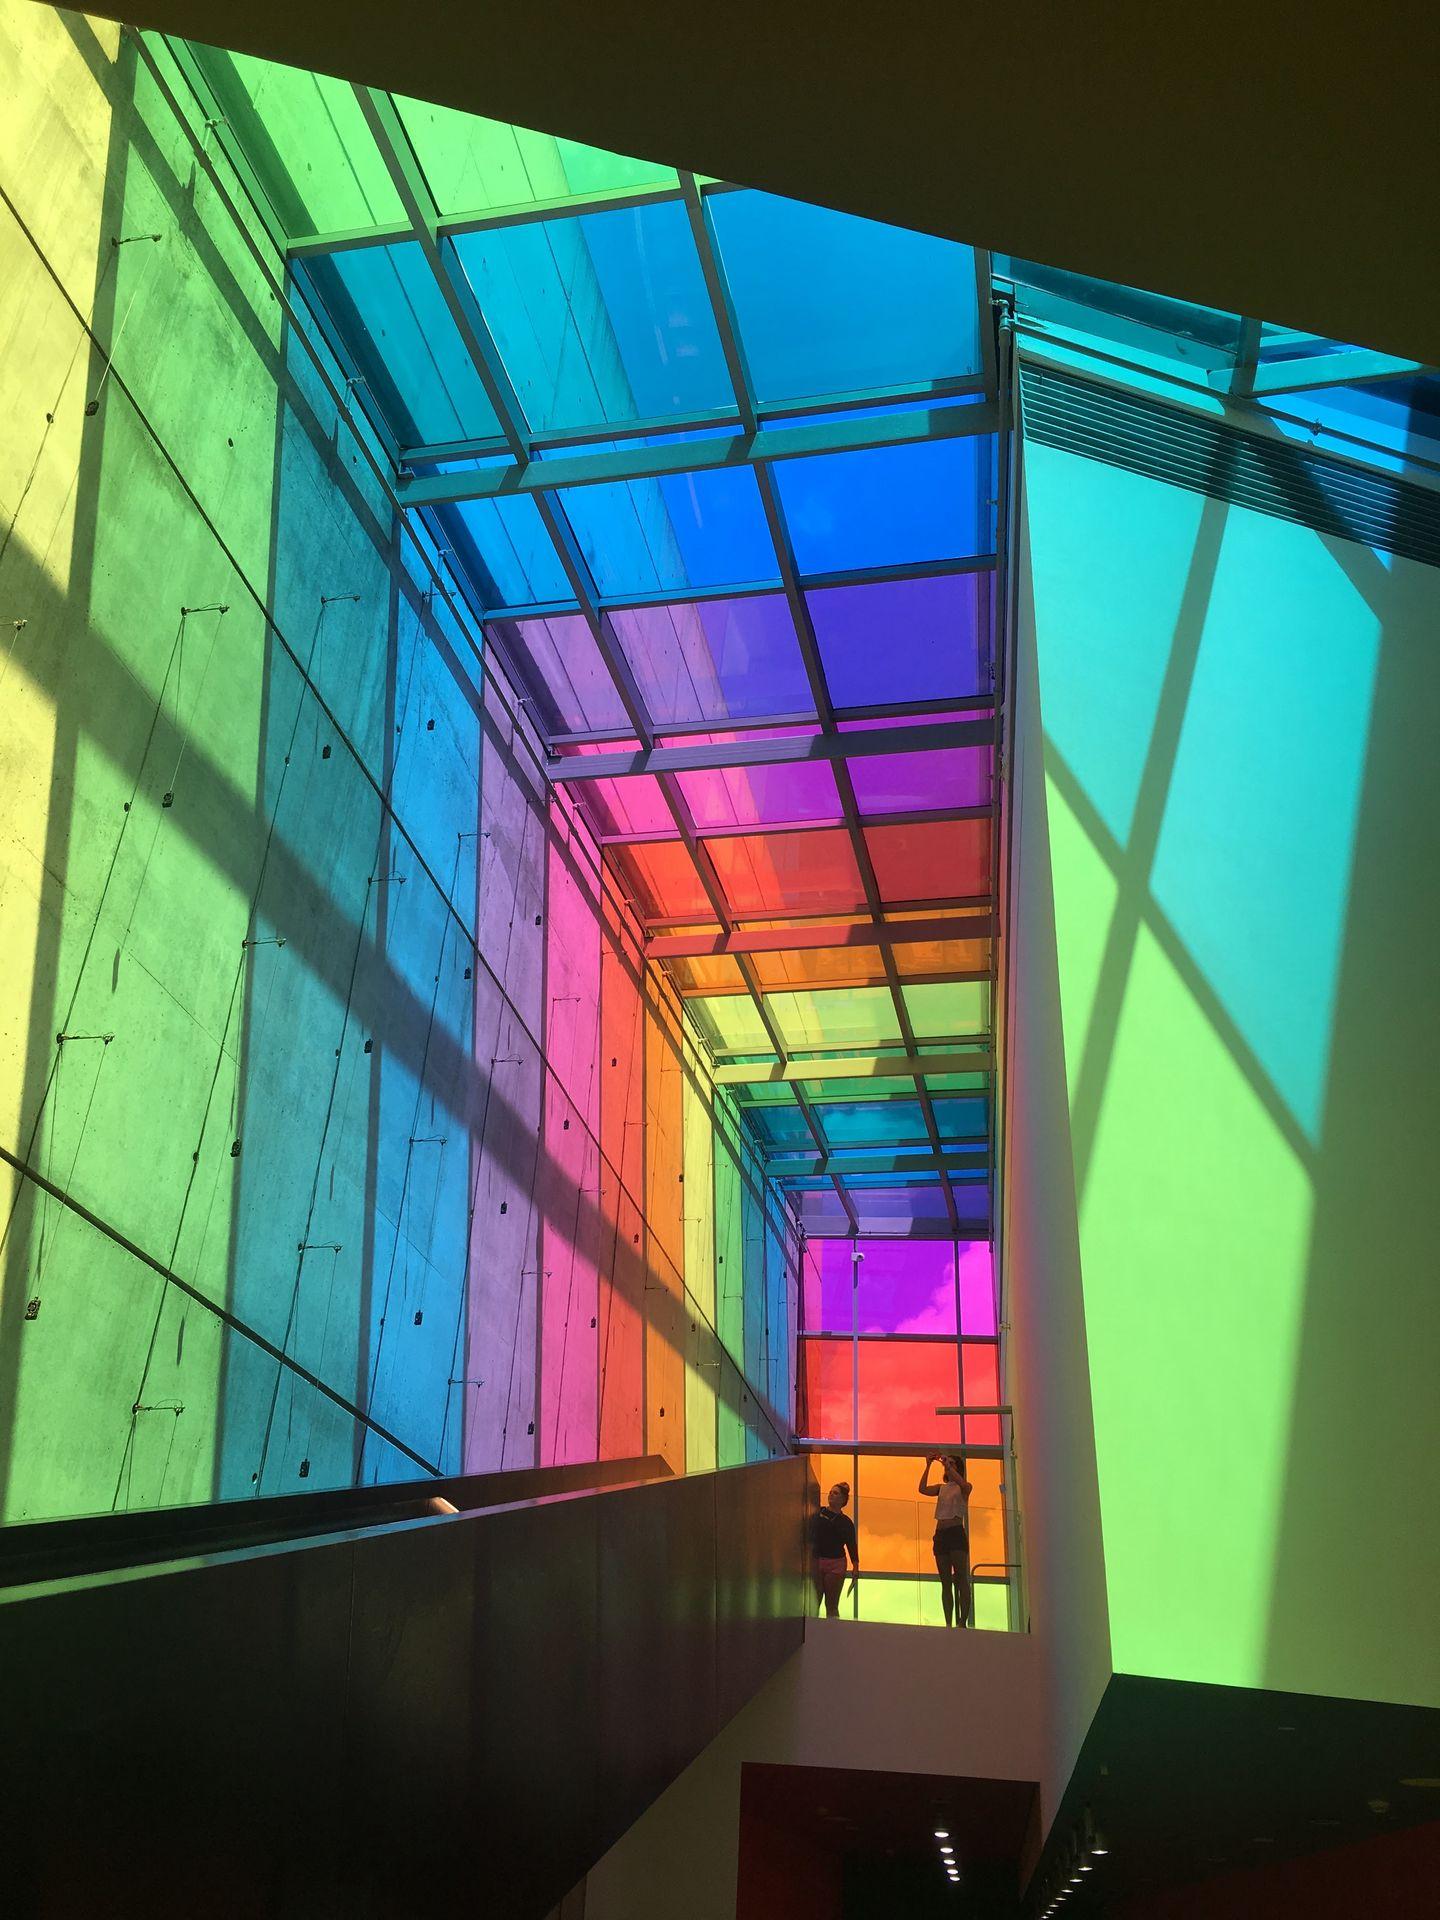 A hallway in the interior of the CAC that is lit to be rainbow colors. There are windows at the top and shadows created by the window panes.